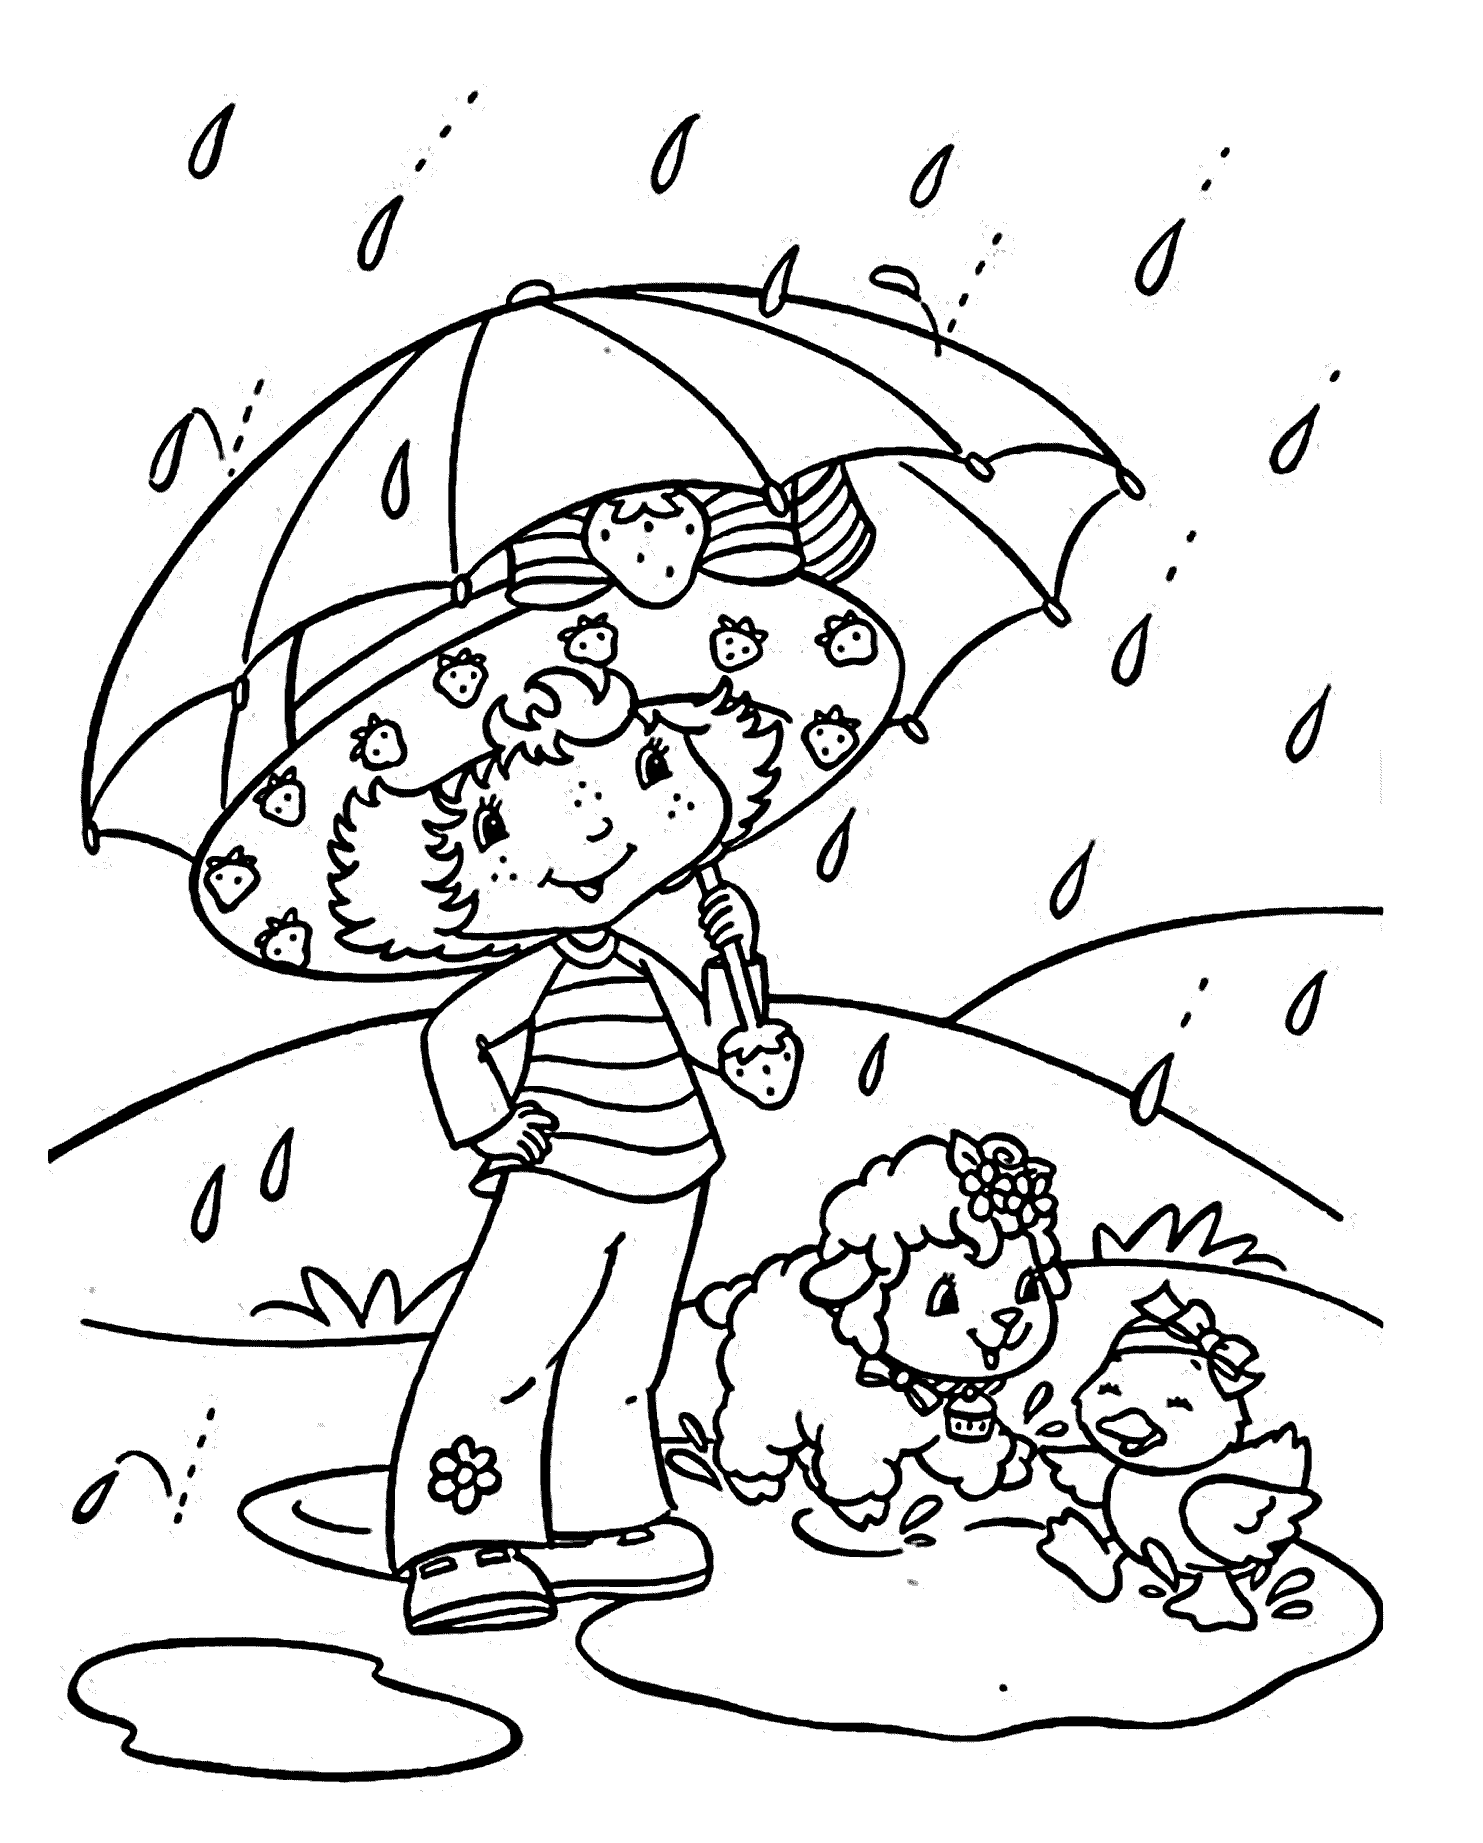 rain coloring page rain coloring pages to download and print for free rain page coloring 